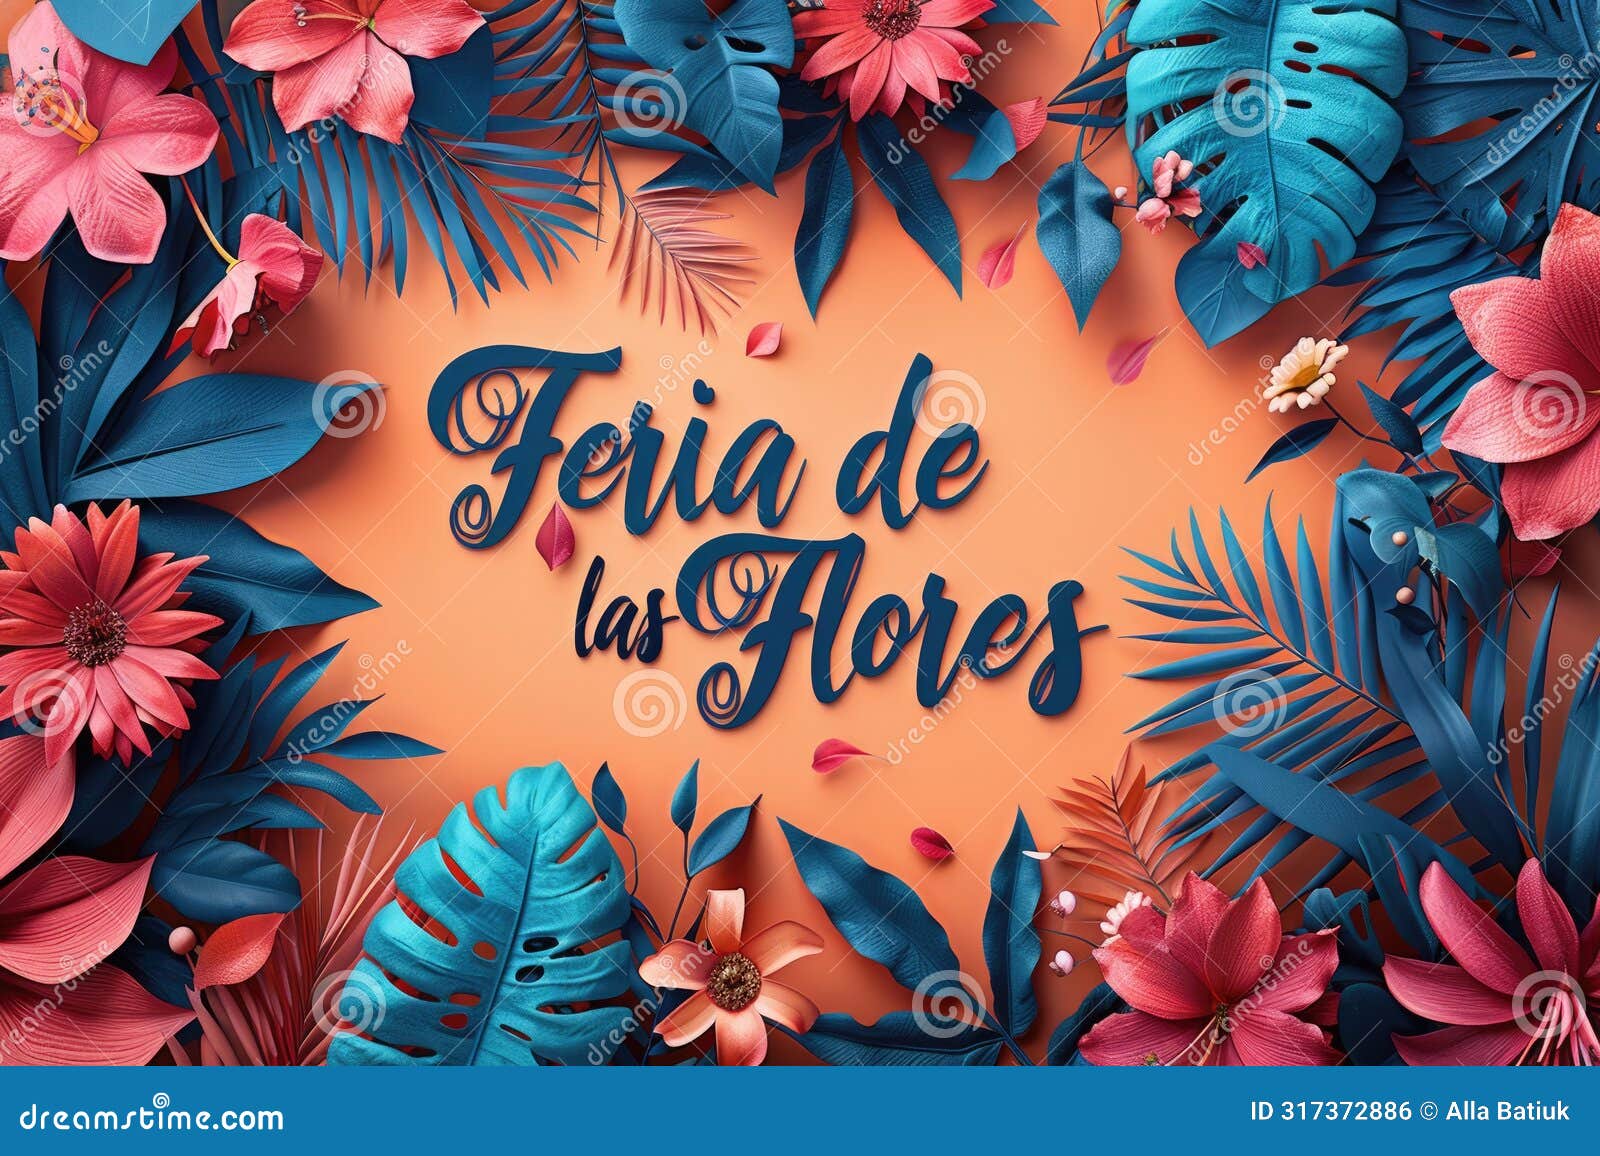 blooming festivity: feria de las flores highlighted amidst a riot of colorful blossoms, text harmoniously blending with